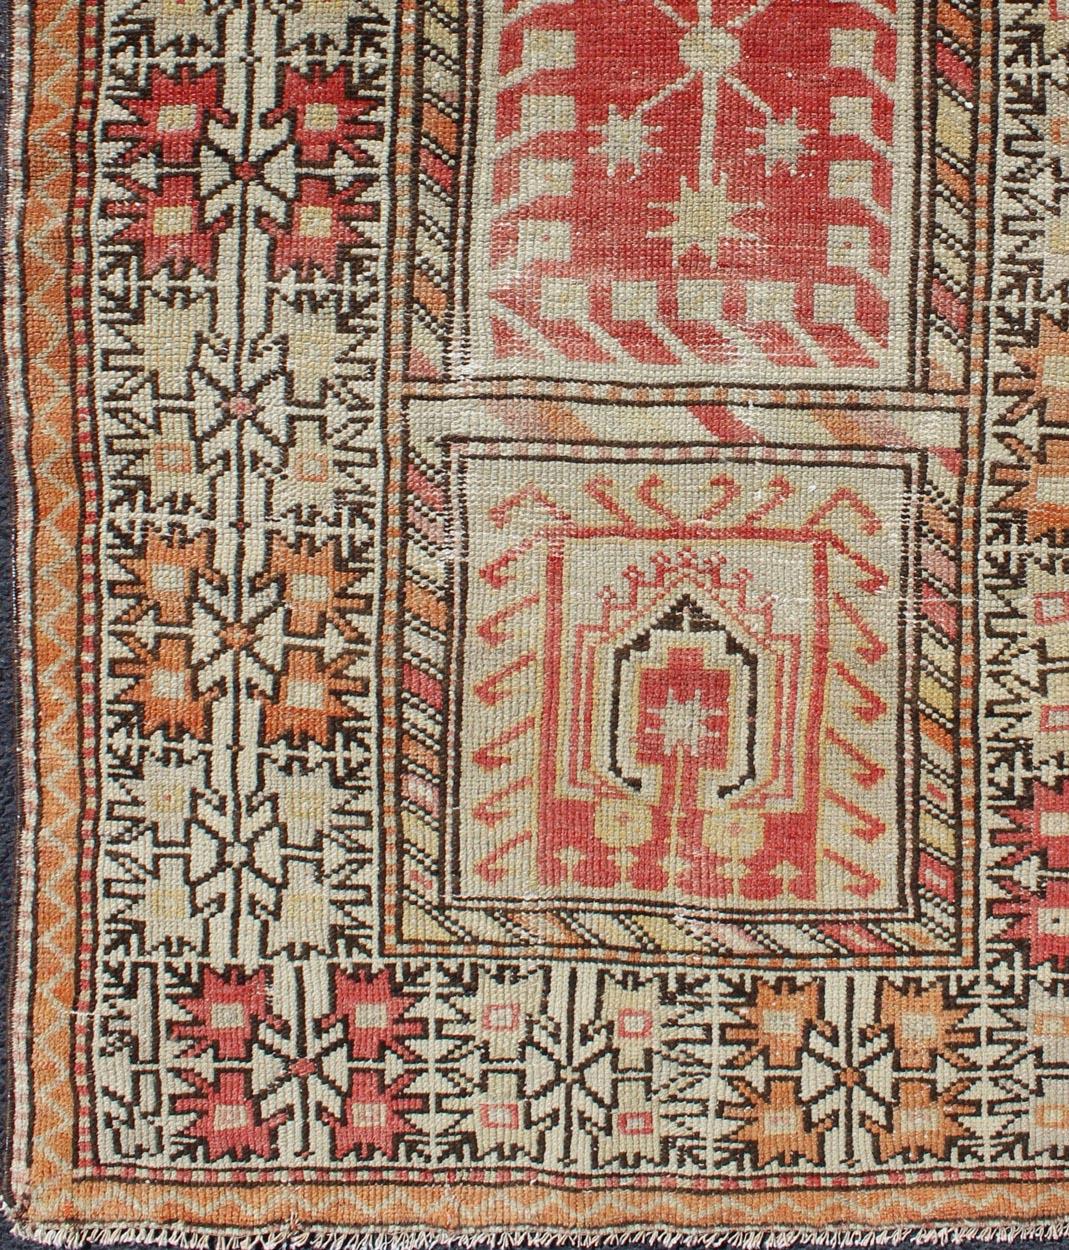 Antique Oushak rug from Turkey with Tribal and Geometric Motifs in Sunset-Colored Palette, rug gng-4743, country of origin / type: Turkey / Oushak, circa 1920.

This striking antique Turkish Oushak rug bears a dazzling tribal-geometric design